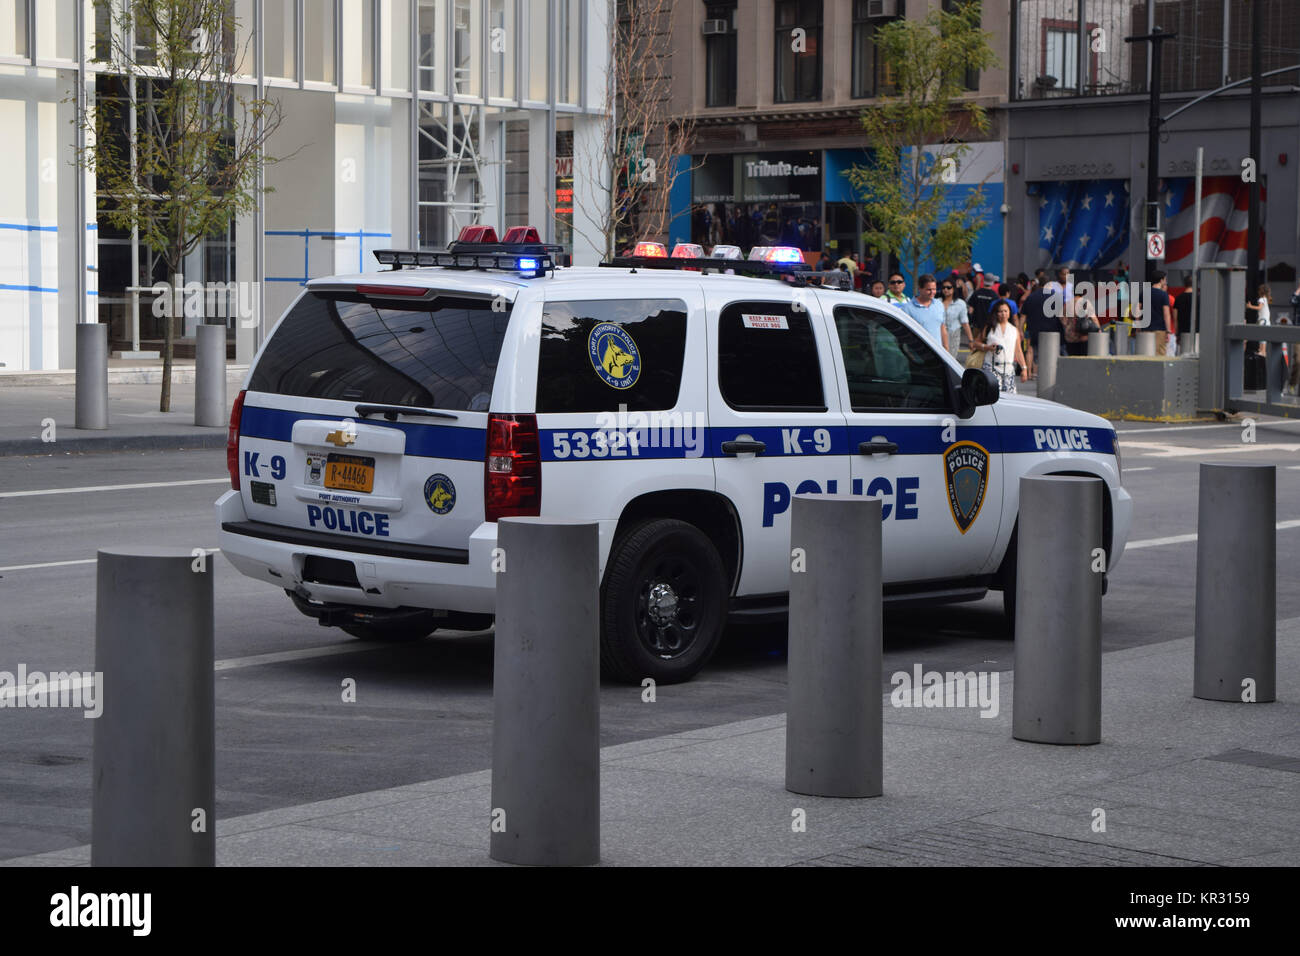 NYPD Cop Car Stock Photo